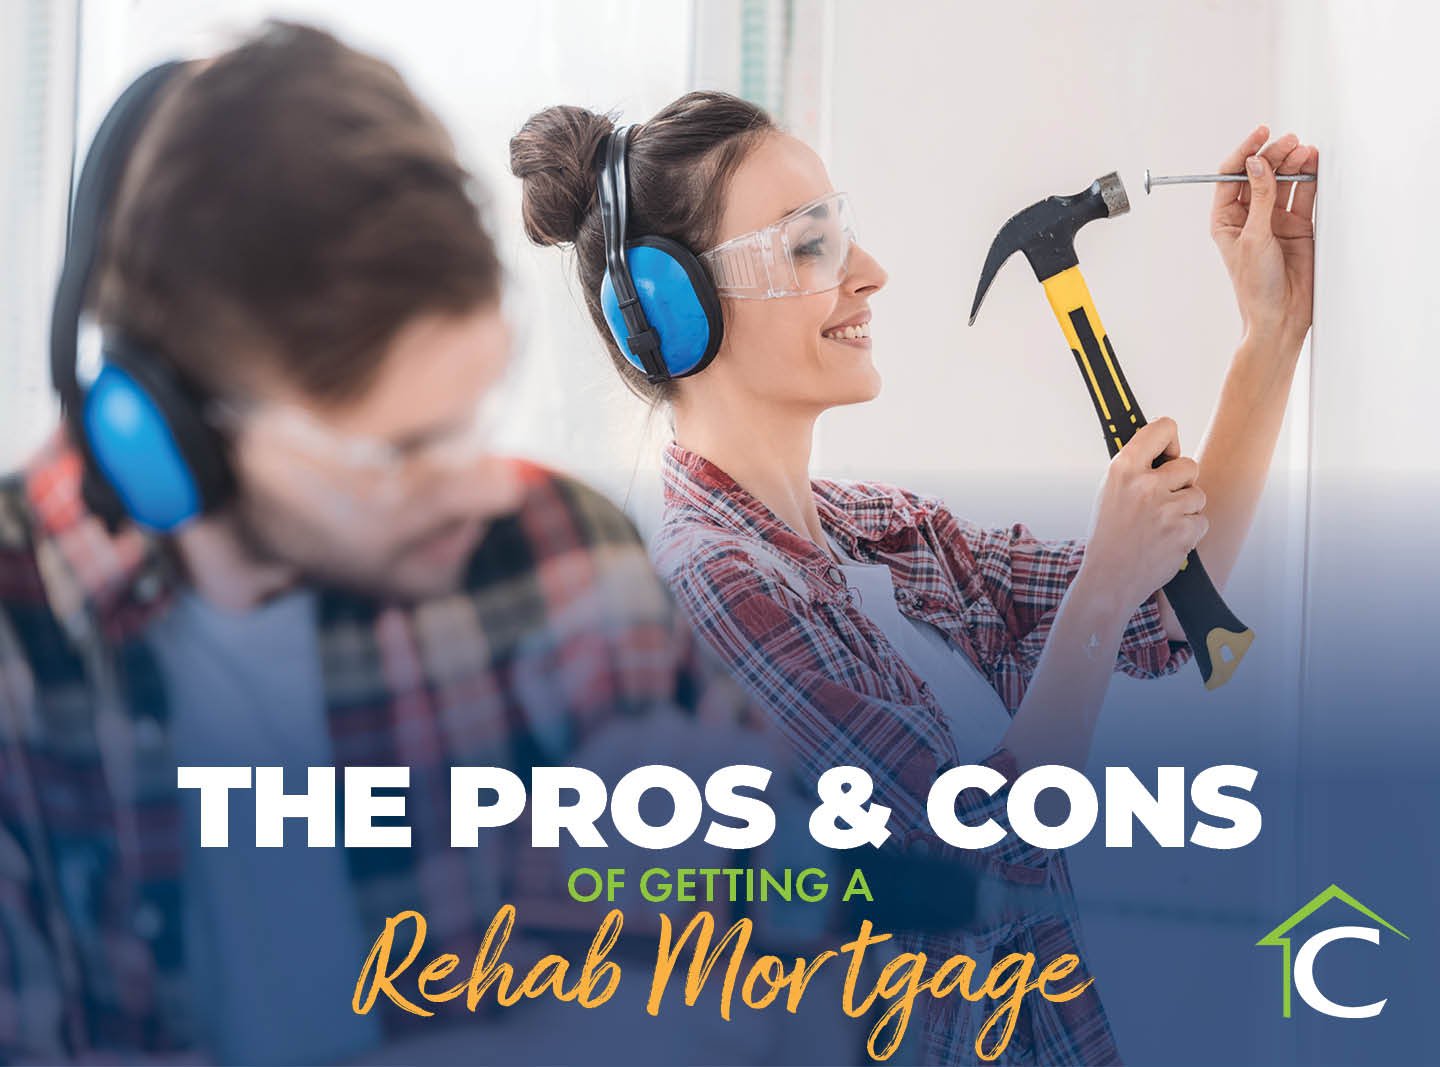 The Pros & Cons of Getting a Rehab Mortgage with couple working on renovating home in background